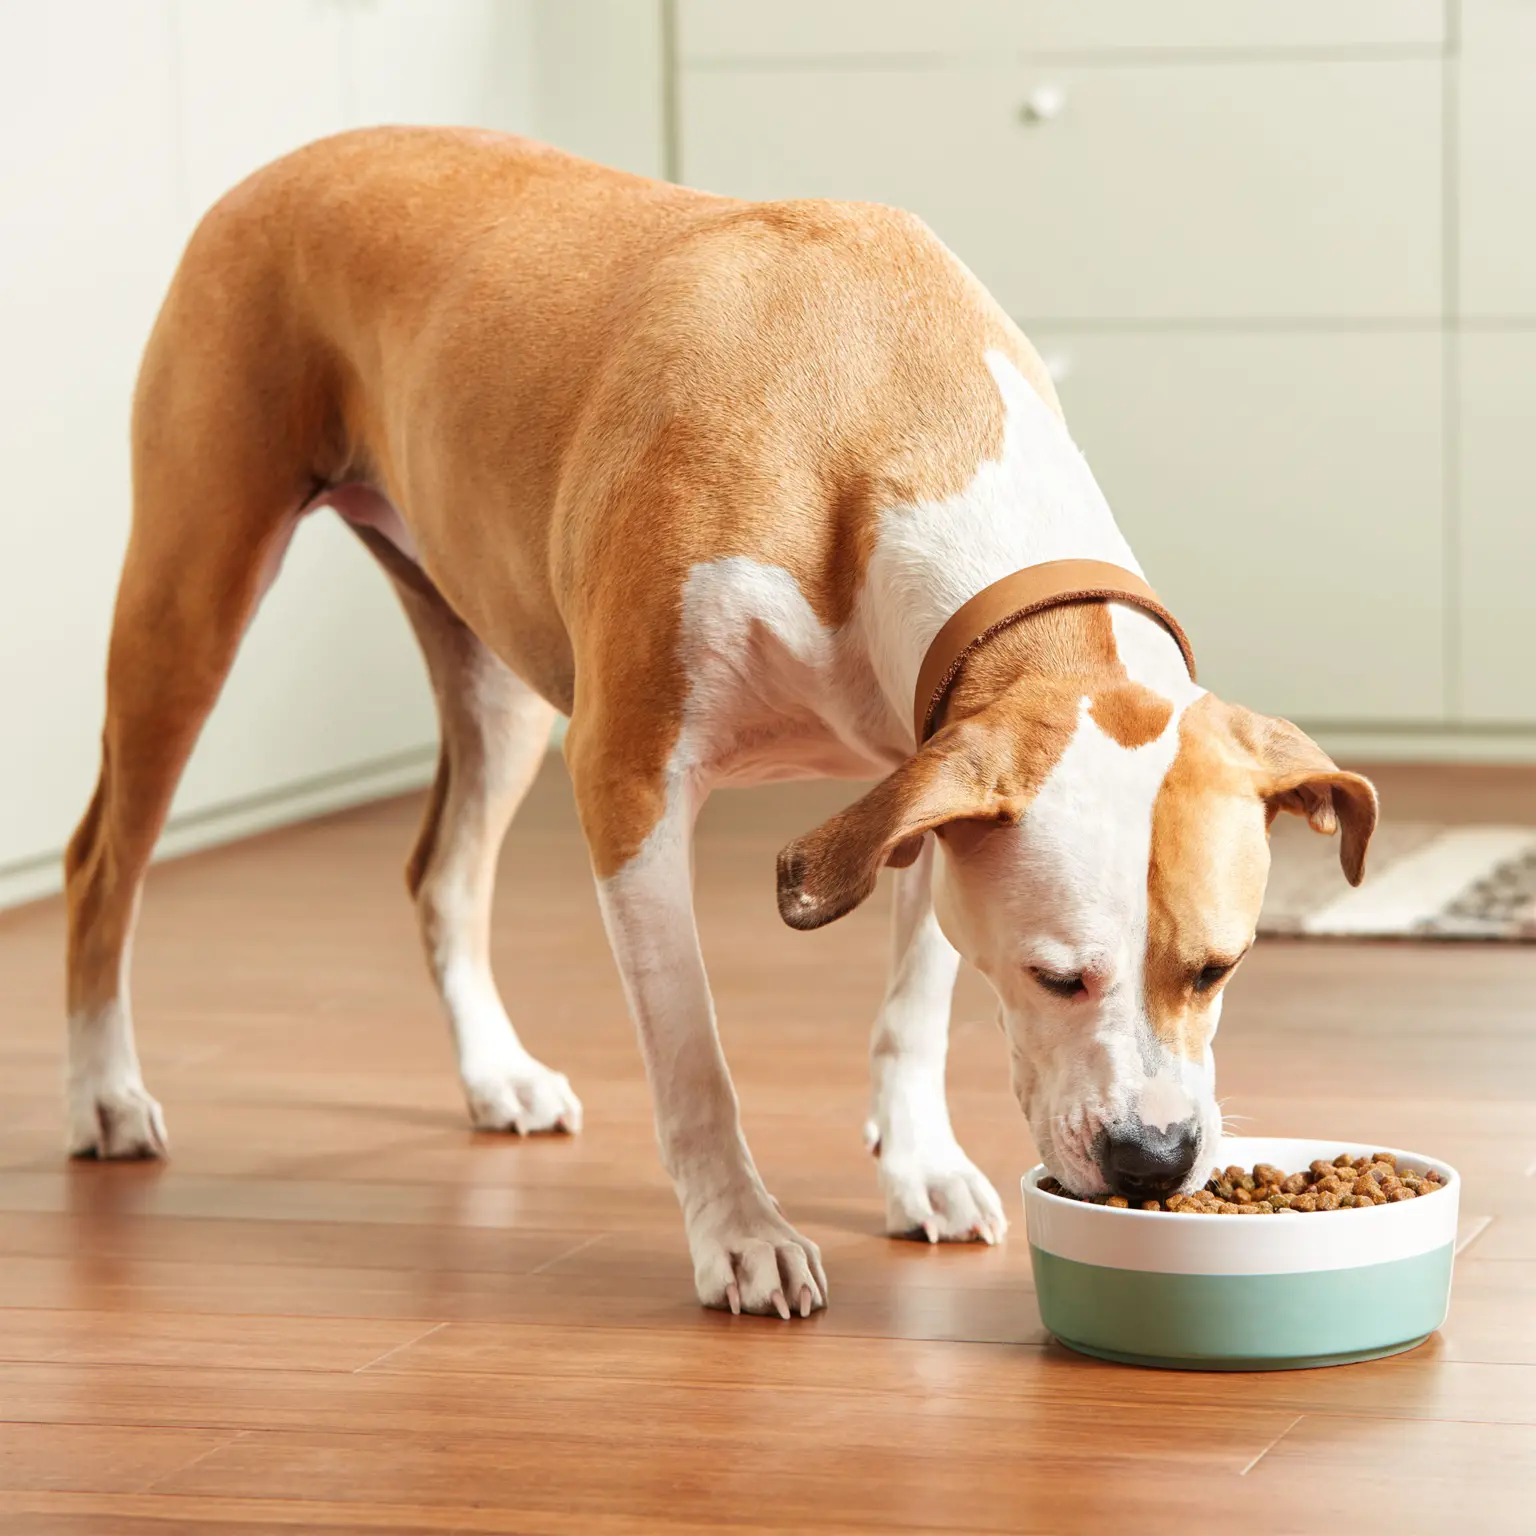 Dog eating kibble out of a bowl